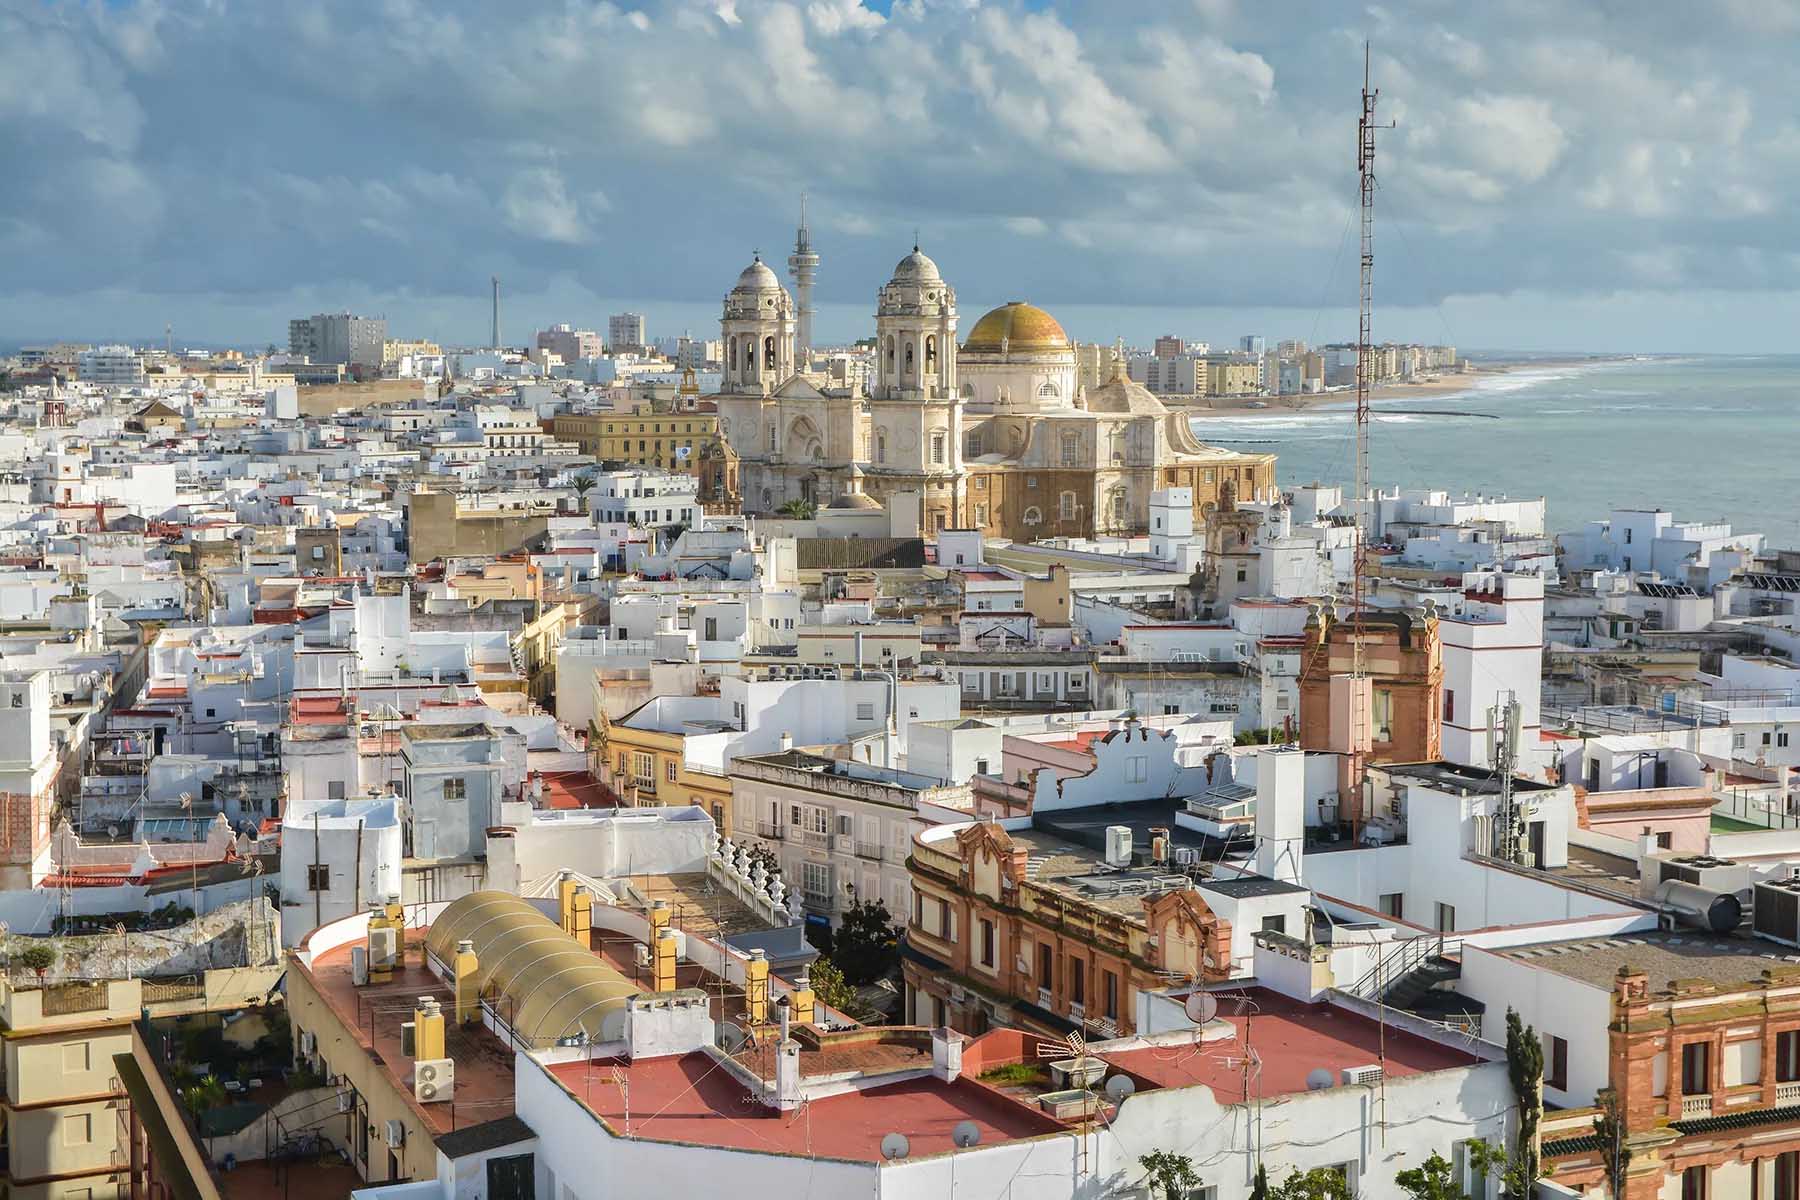 Aerial view of Cádiz cathedral and surrounding city